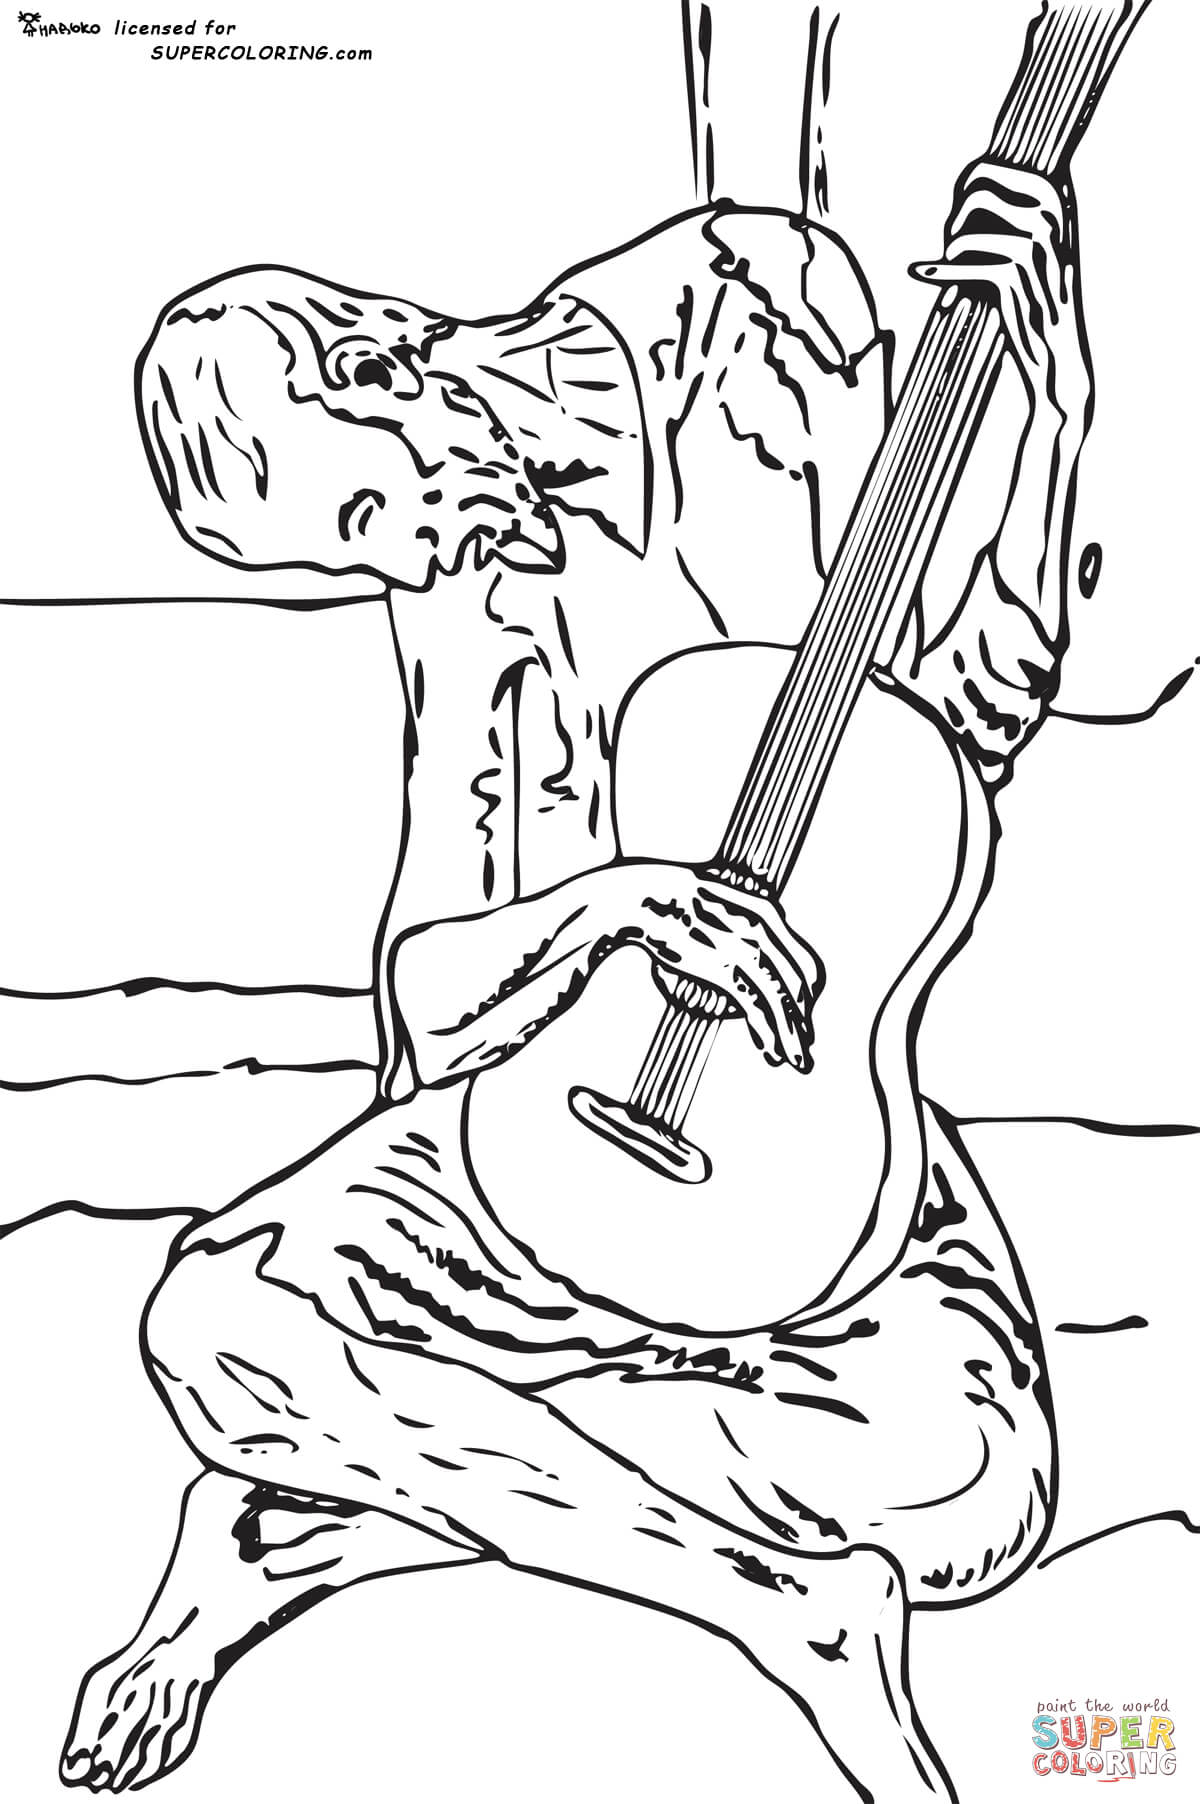 The old guitarist by pablo picasso coloring page free printable coloring pages